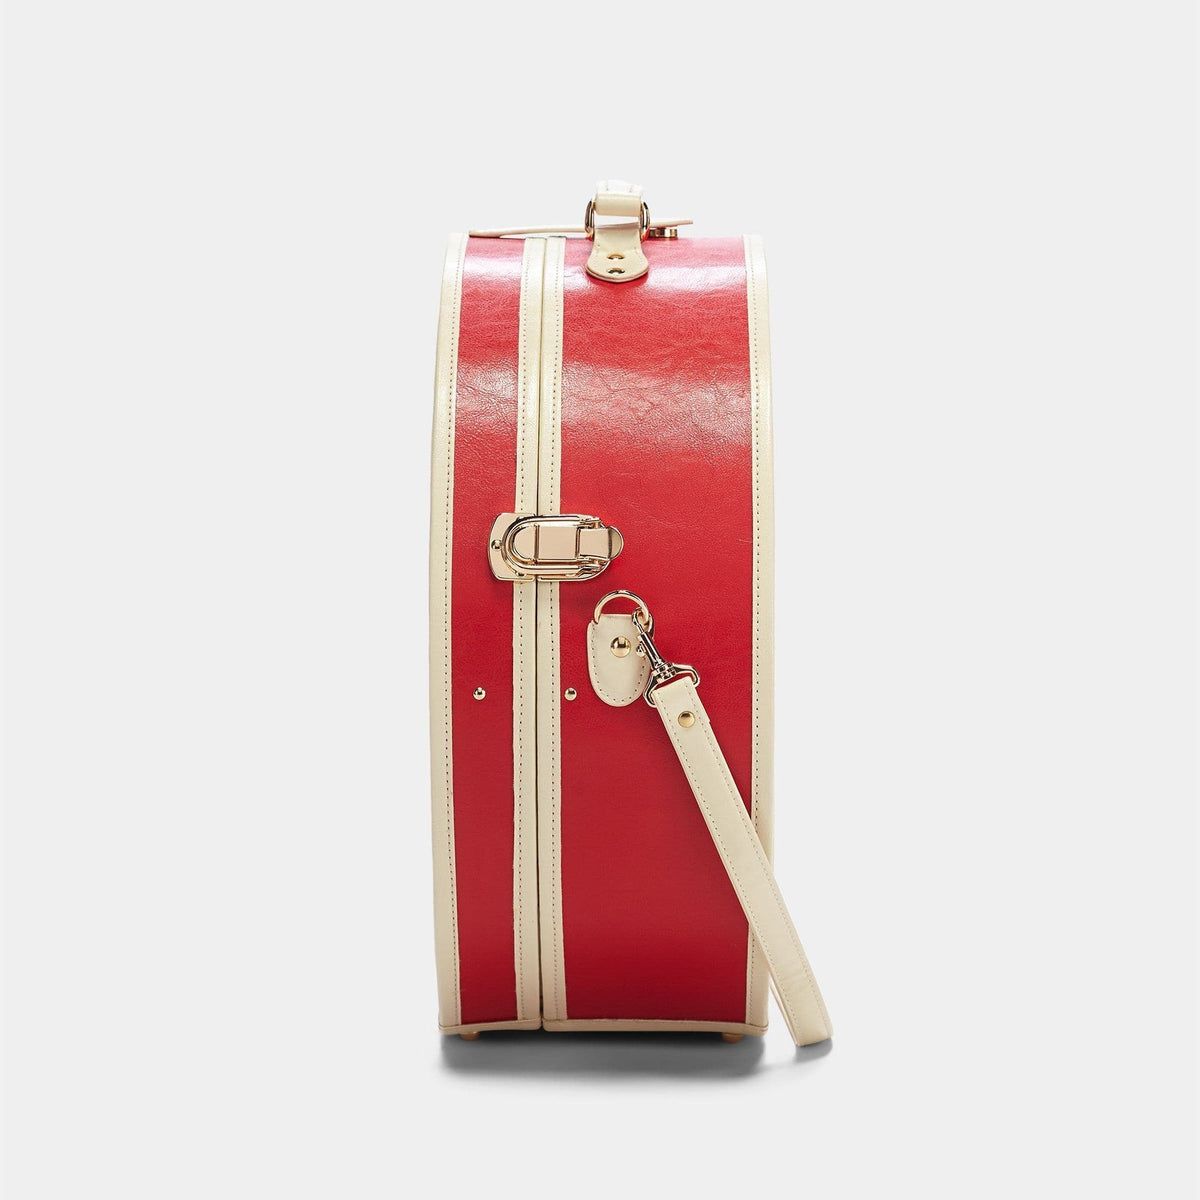 Steamline Luggage The Entrepreneur Deluxe Hatbox Red